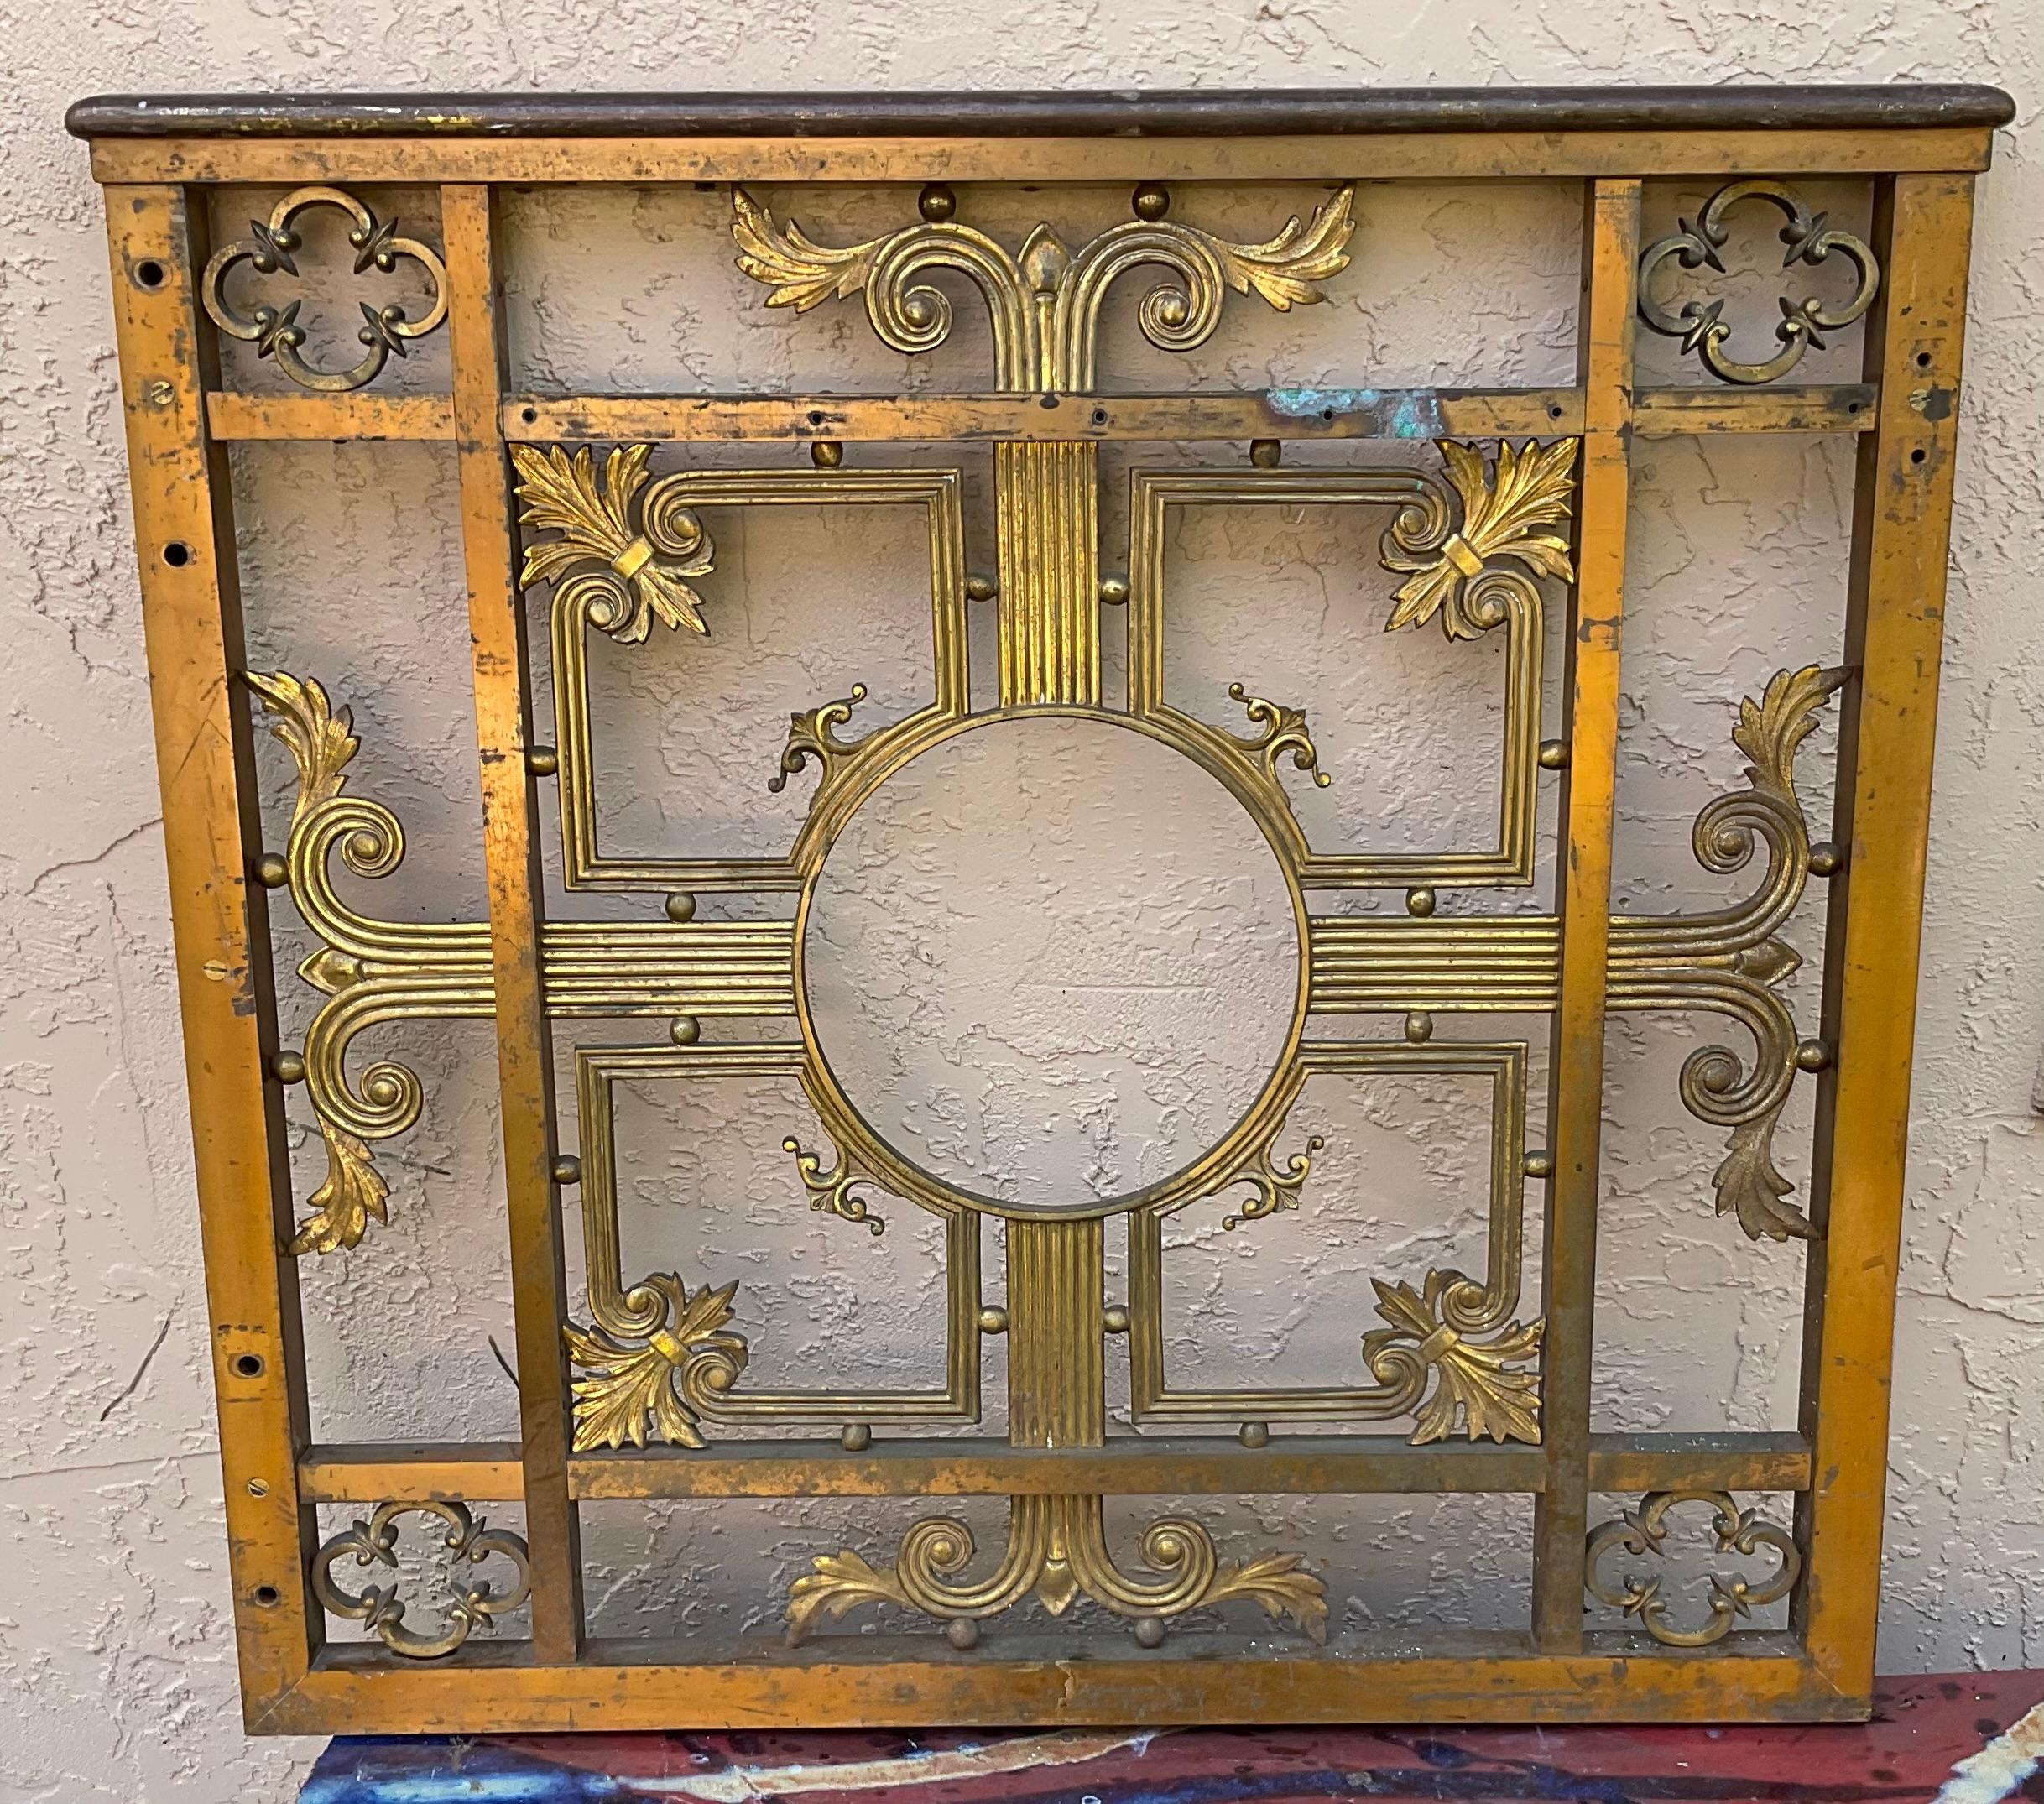 This classic early 1900's bronze pedestrian or garden gate or indoor door ,with central medallion , was salvage probably from a bank or big institution building .
exquisite and decorative motif , part of Americana salvage .
Could be converted with